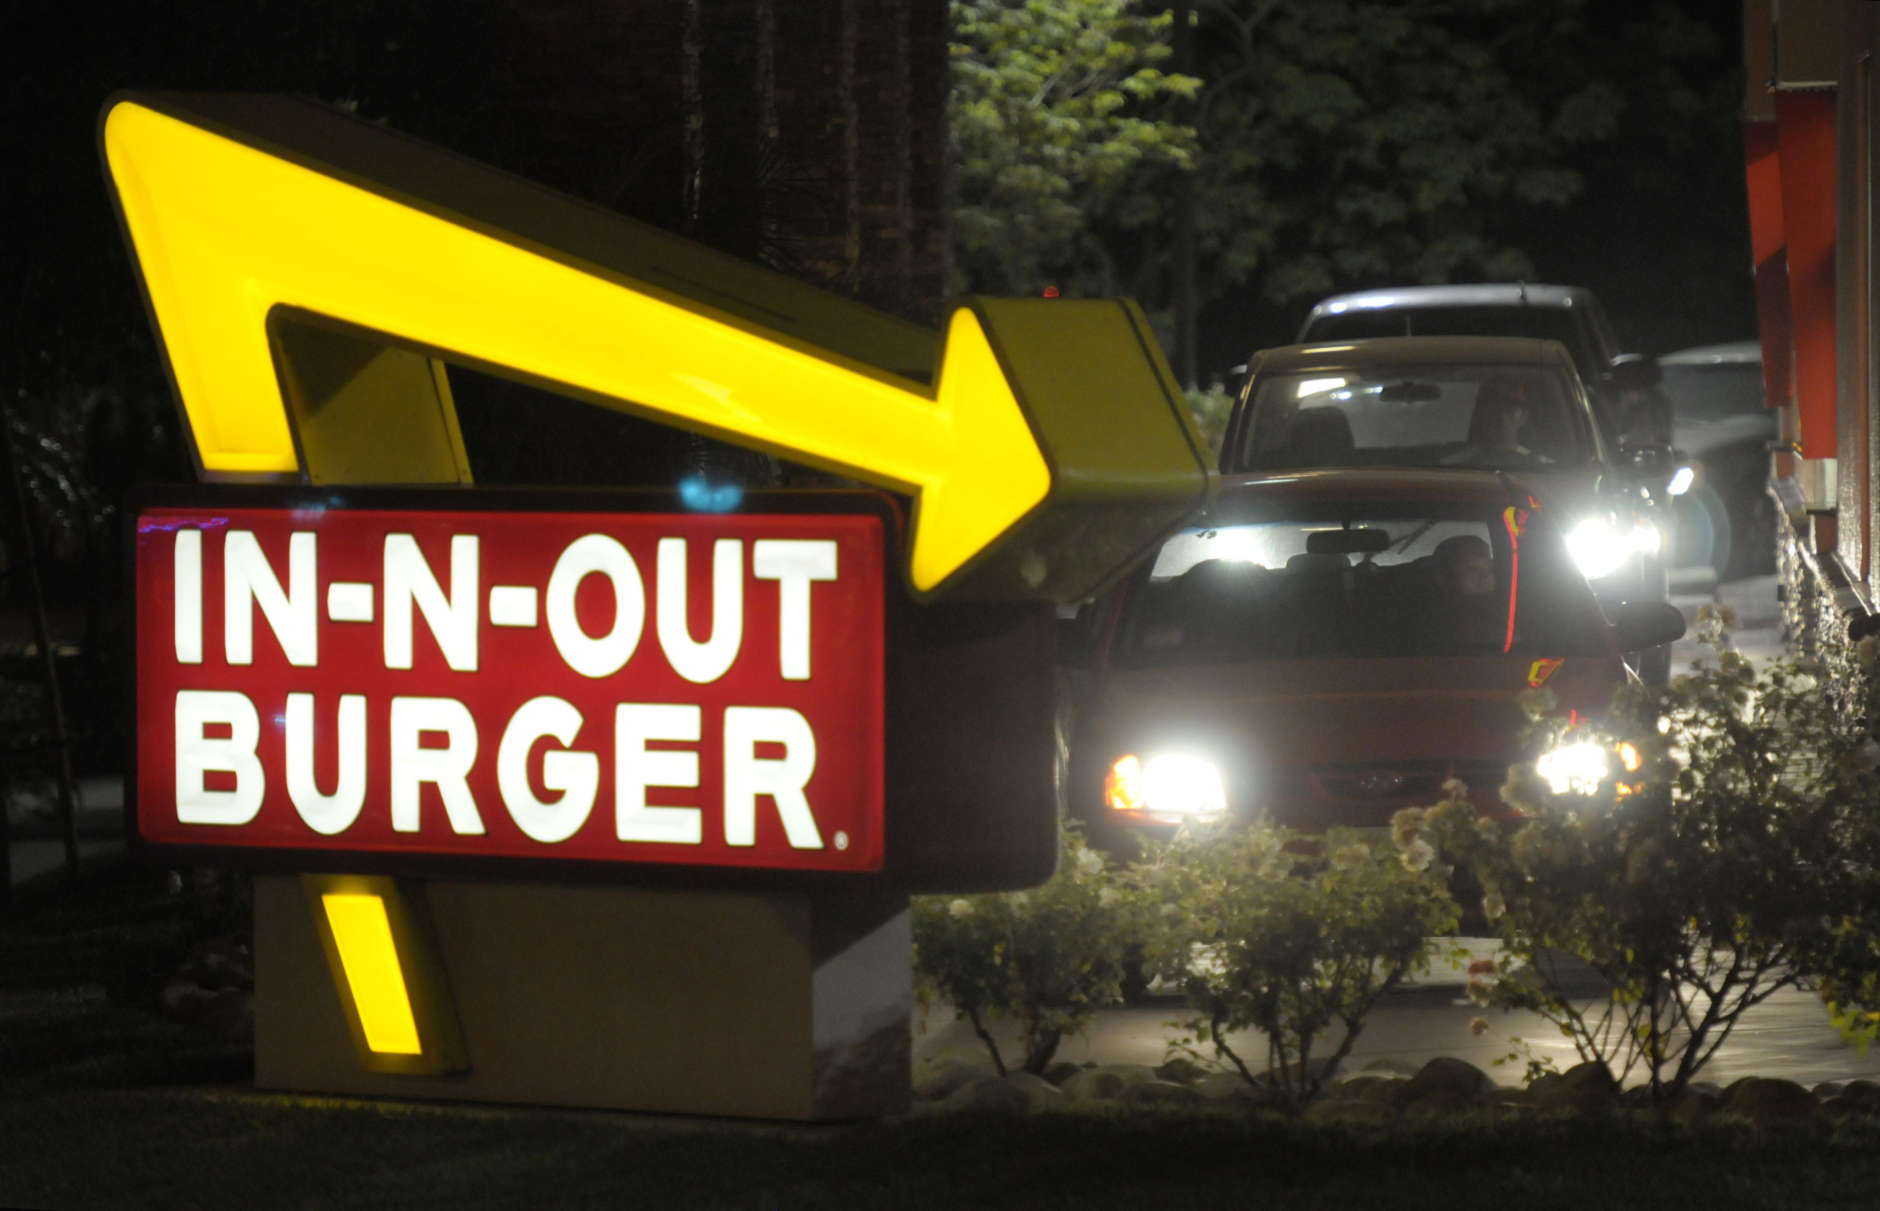 Cars line up in the drive-thru at In-N-Out Burger on Tuesday, June 8, 2010, in Baldwin Park, Calif. (AP Photo/Adam Lau)